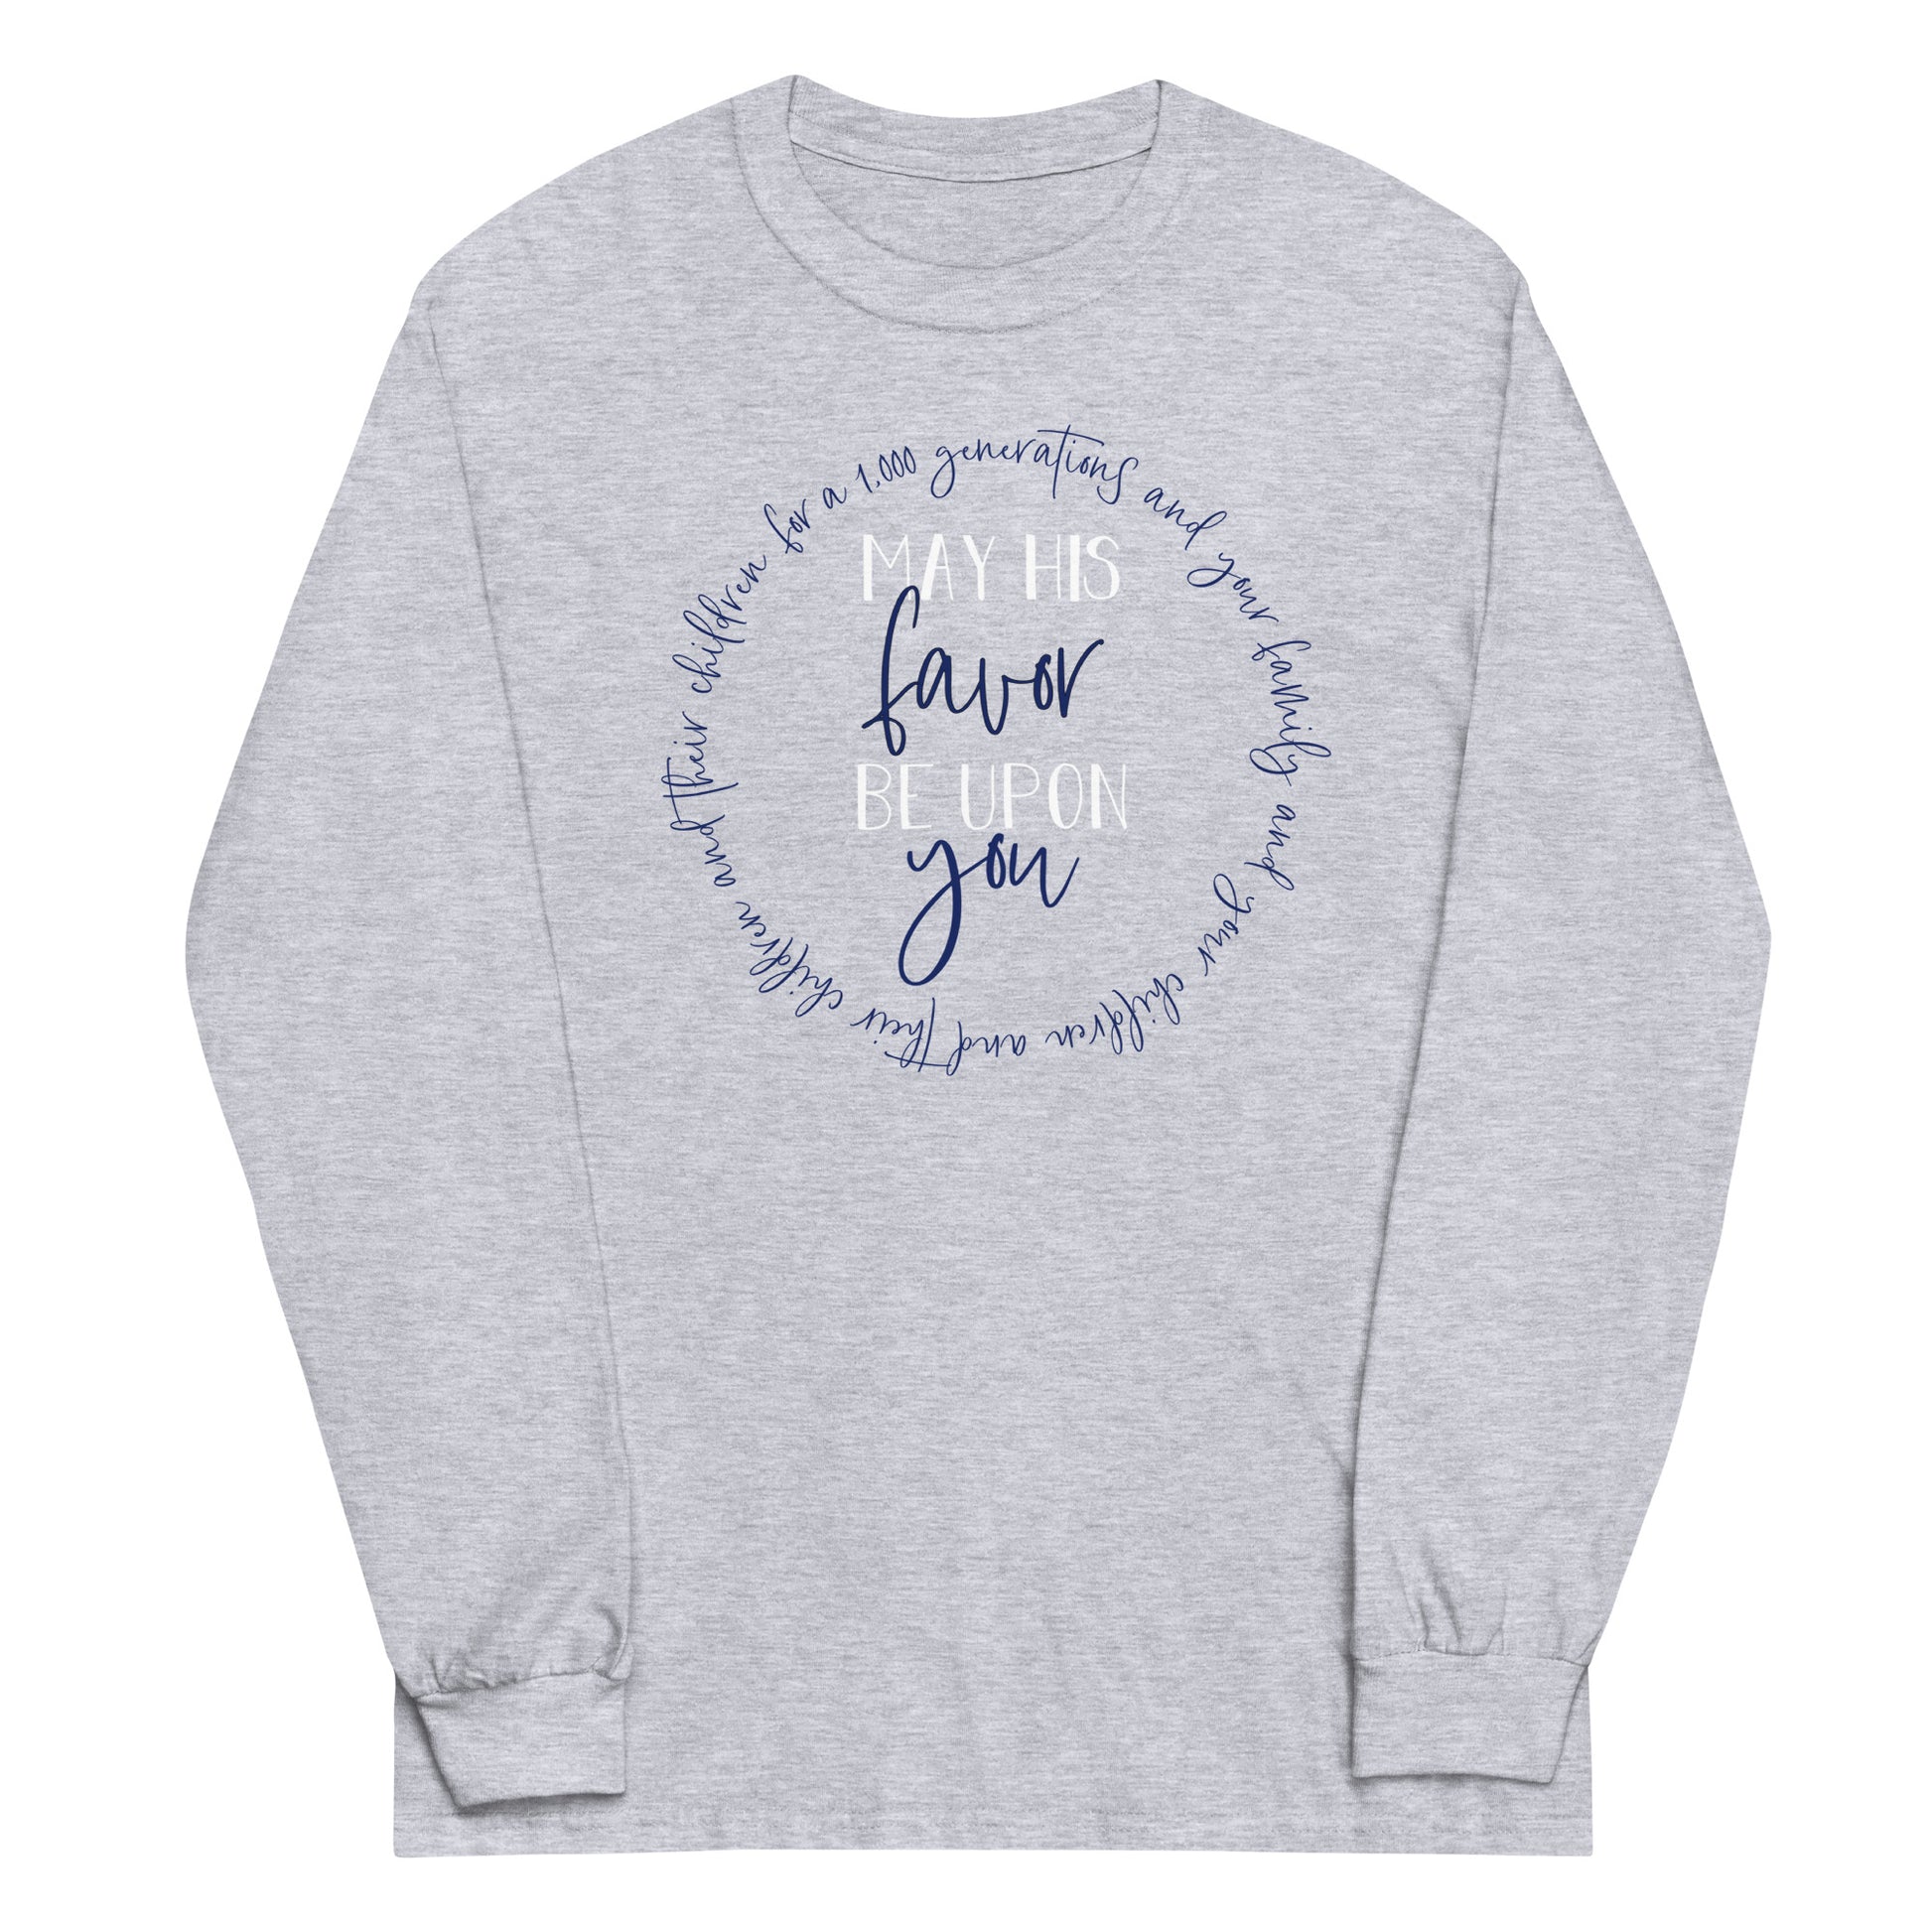 May His Favor Be Upon You Numbers 6 Blessing Christian aesthetic design printed in navy and white on soft heather gray long sleeve tee for women